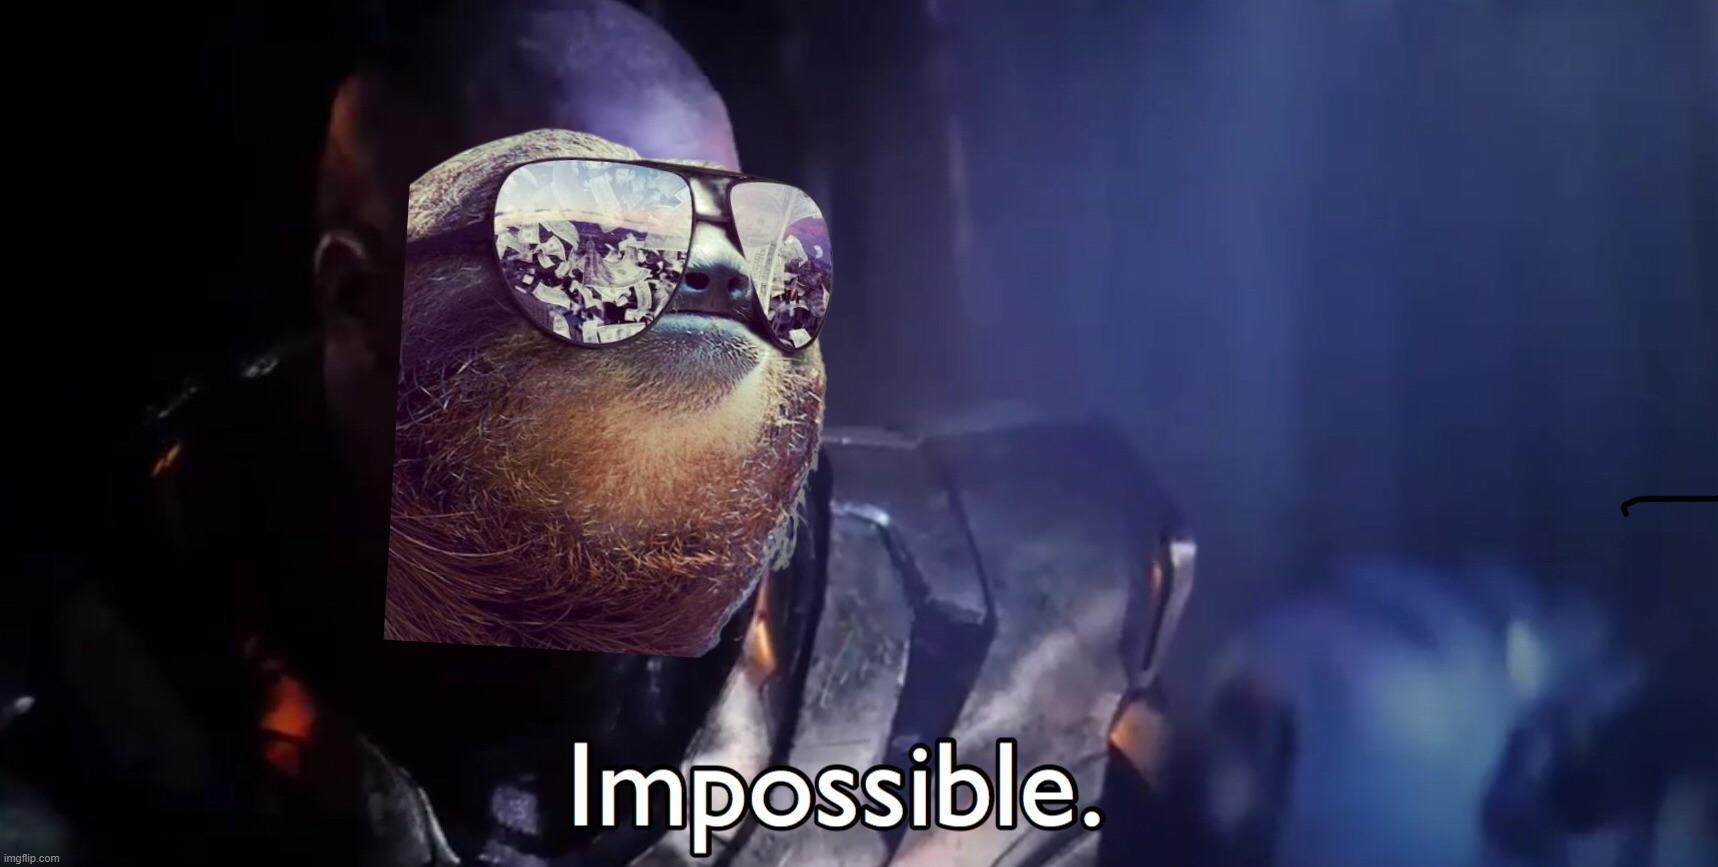 Thanos sloth impossible | image tagged in thanos sloth impossible | made w/ Imgflip meme maker